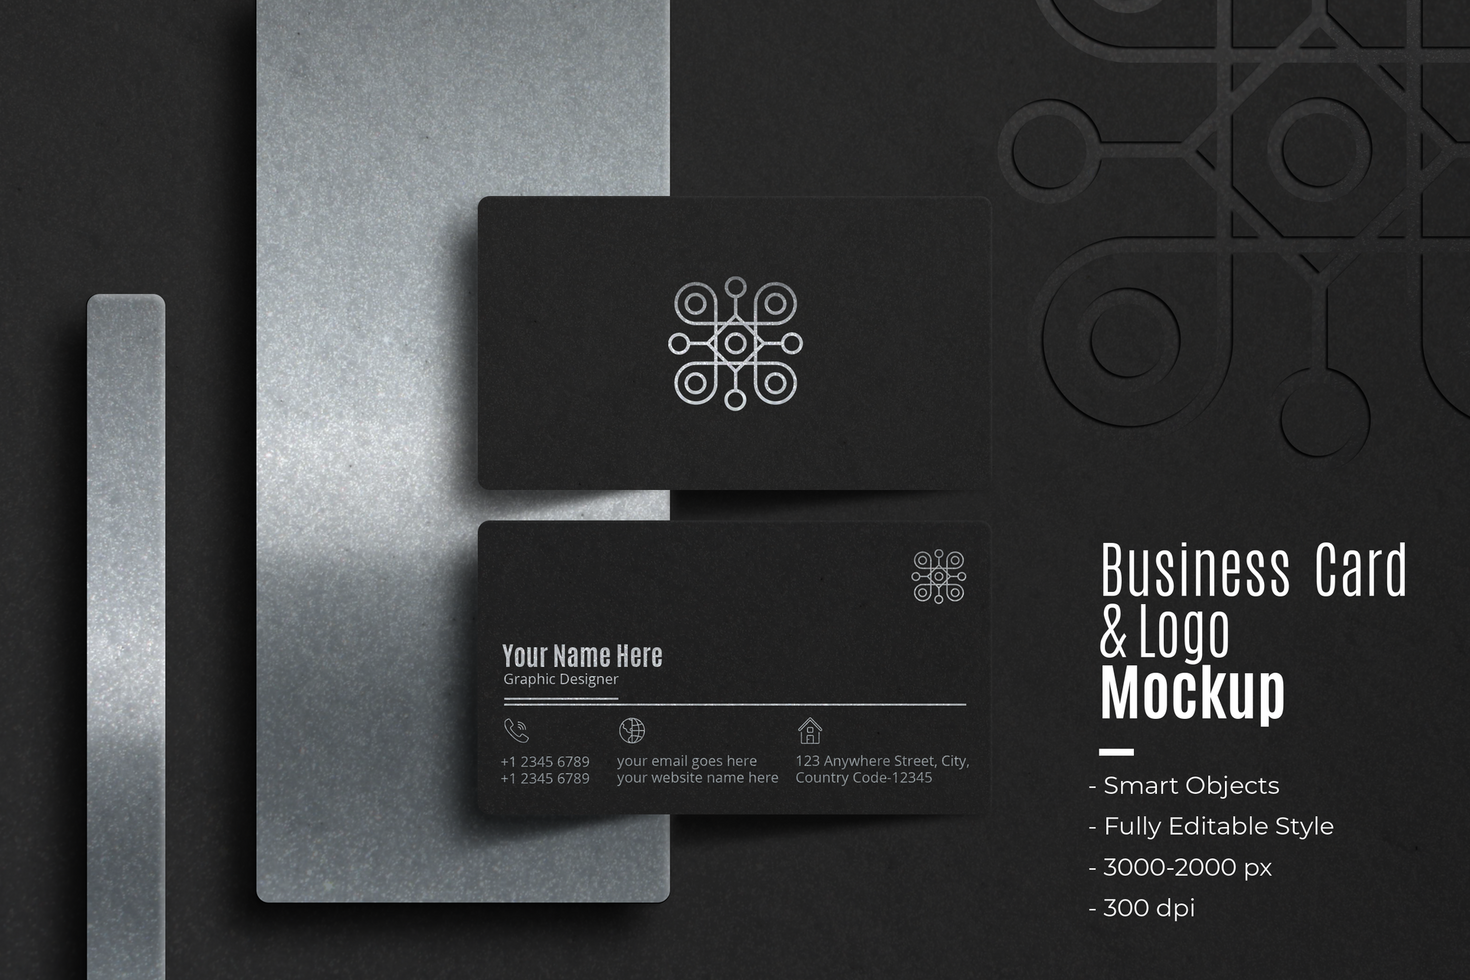 Realistic Business Card and Logo Mockup Background psd